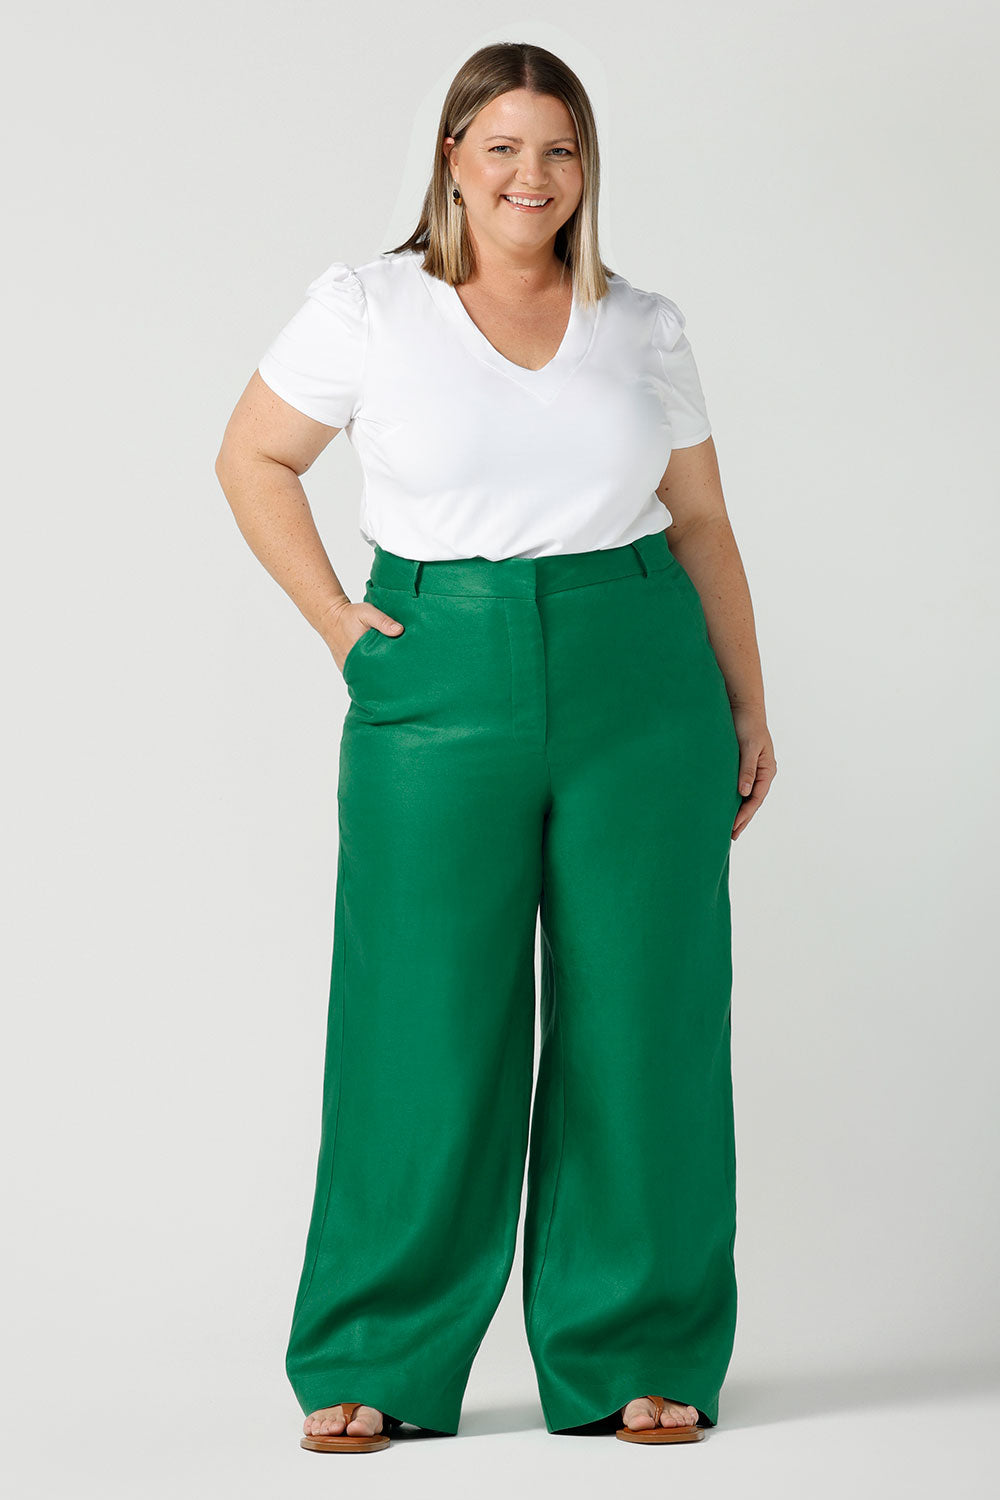 A size 18 curvy woman wears a tailored linen pant in 100% linen. Breathable linen fabrication in a beautiful emerald green colour. The perfect workwear pants with pockets that make great summer pants. Size inclusive fashion designed and made in Australia size 8 - 24. 